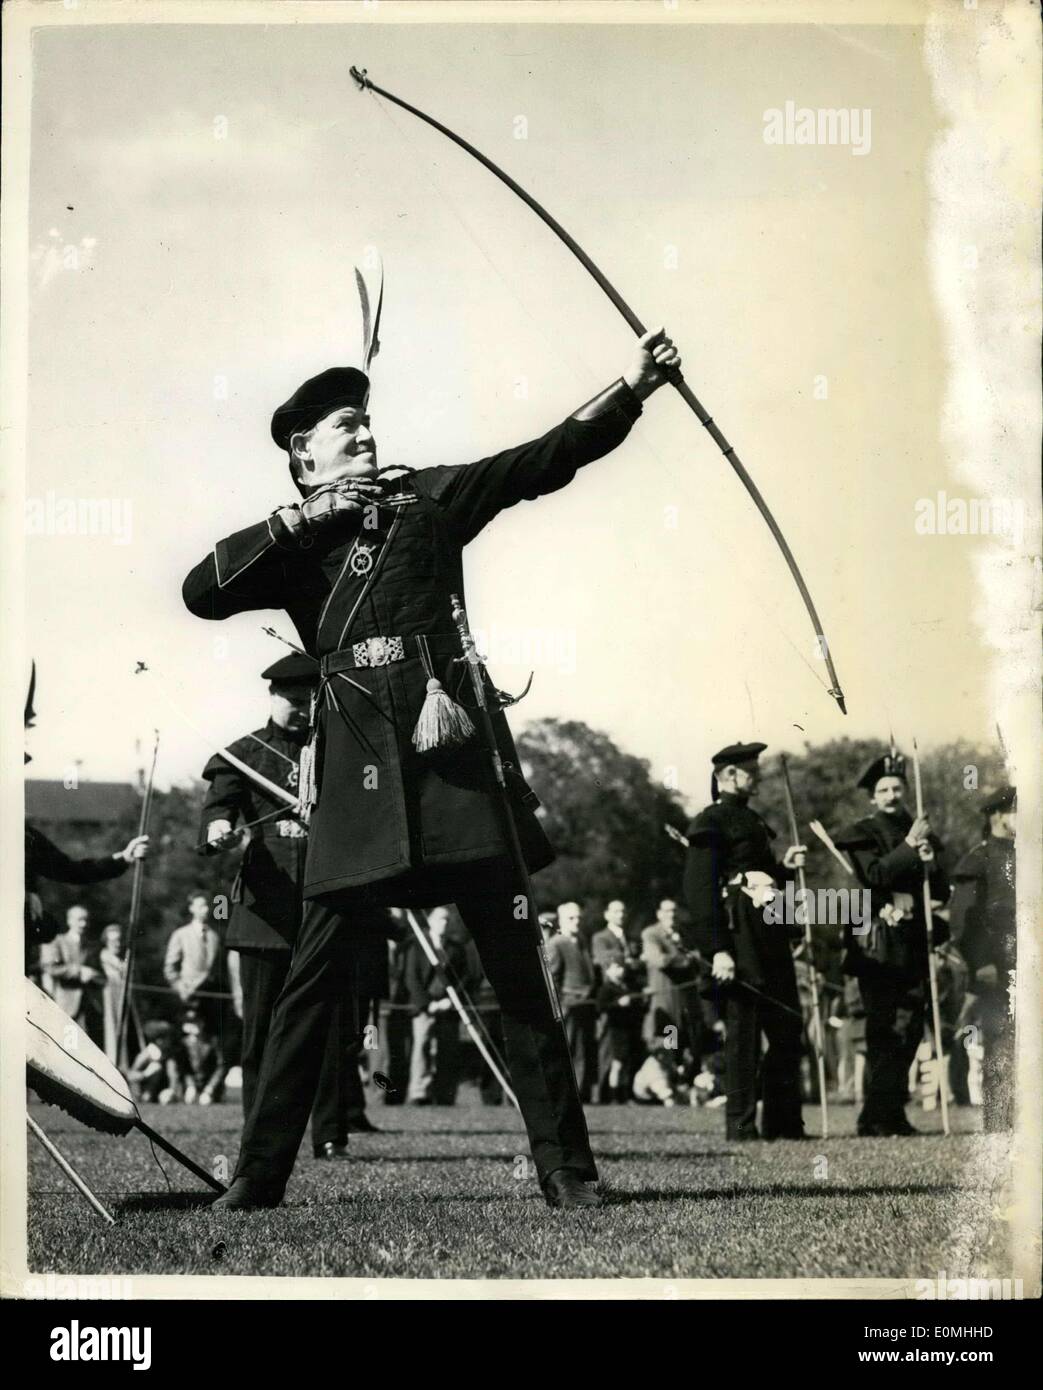 May 17, 1955 - Shooting for the ''edinburg Arrow'' Archery contest in Scotland/: The Royal Company of Archers - The Queen's Bodyguard for Scotalnd shot for the Edinburgh Arrow at the West Meadows, Ediburgh. Photo shows Brigadier T. Grainger Stewart lets an arrow go for the target during the contest. Stock Photo